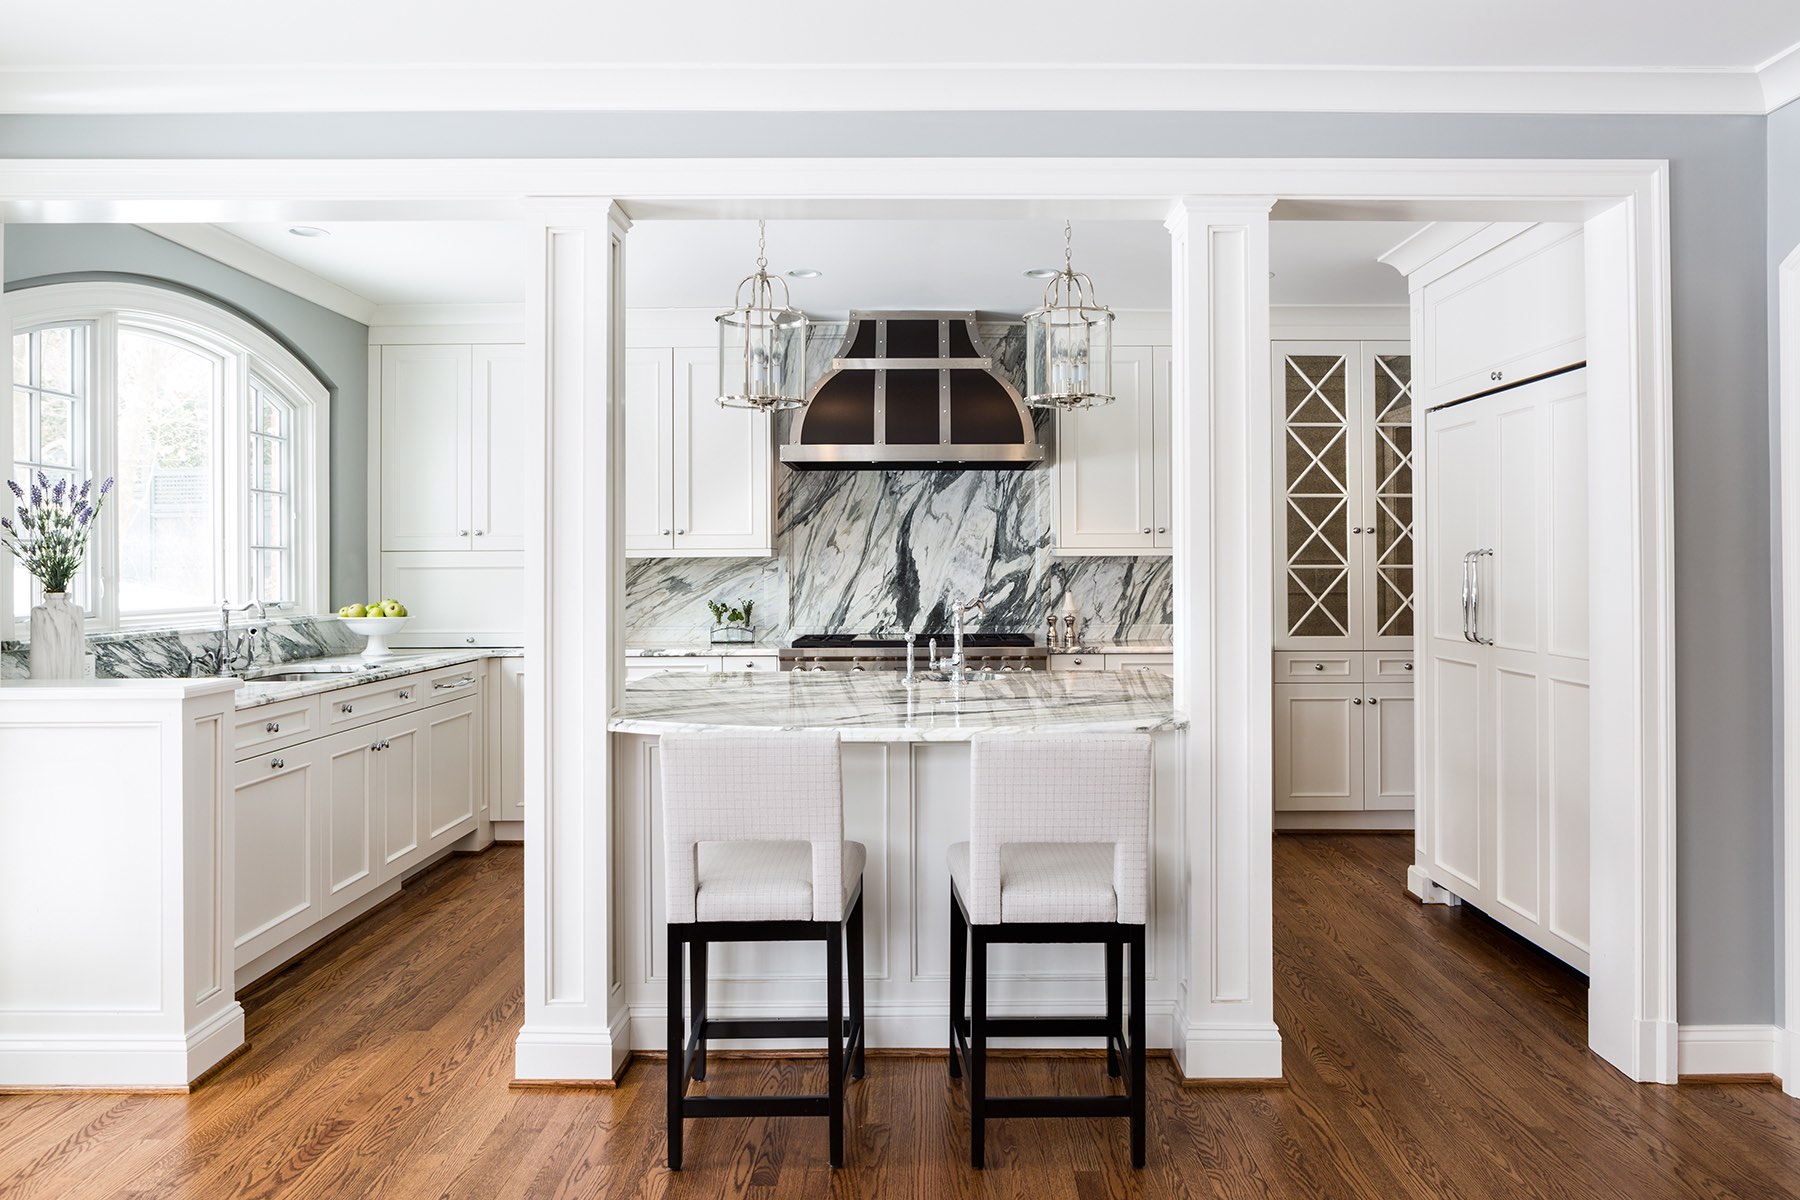 Custom kitchen with white cabinetry, white marble counters and island top, steel pendant lights